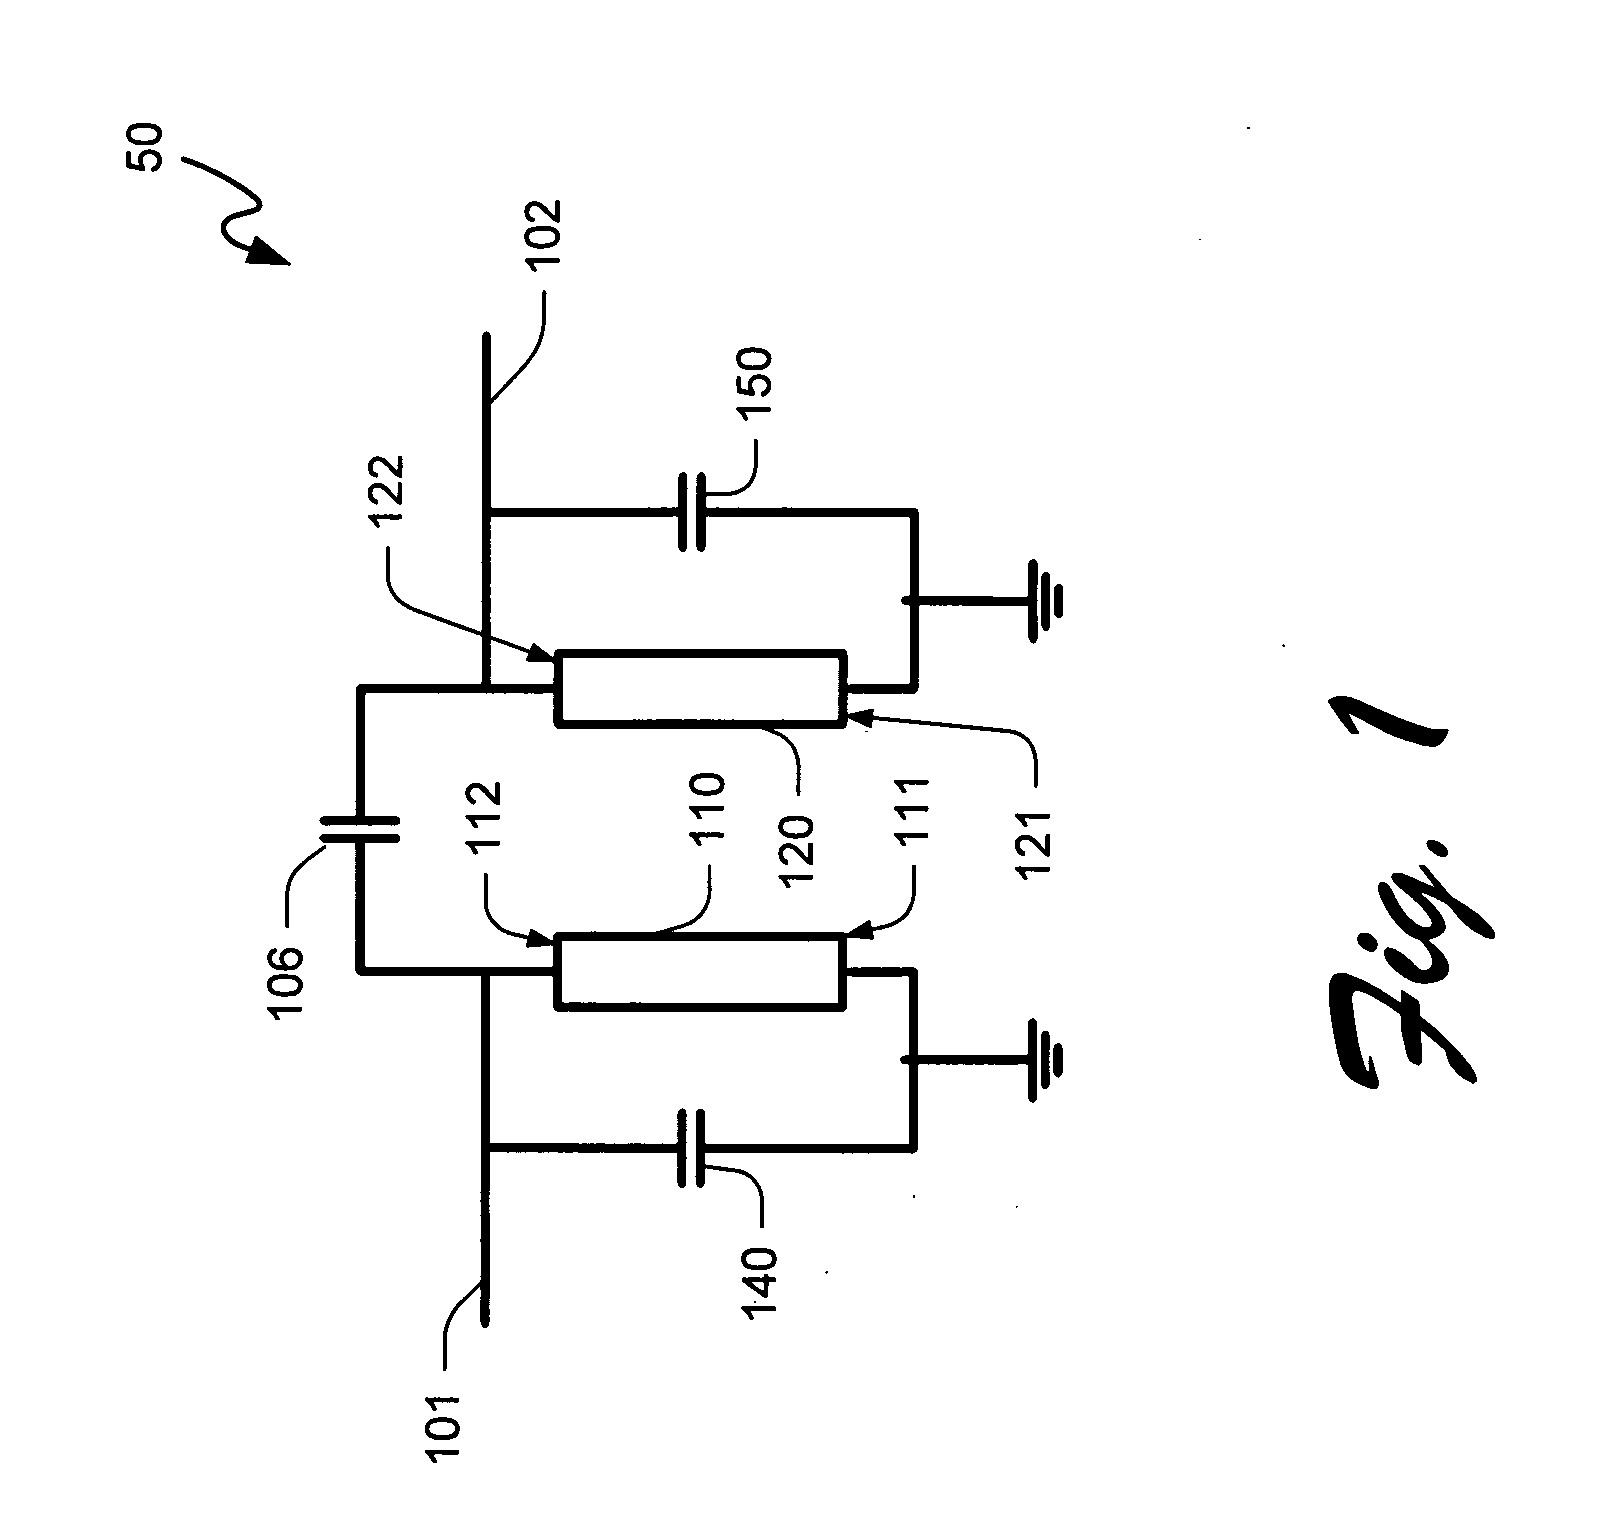 Filter with integrated loading capacitors